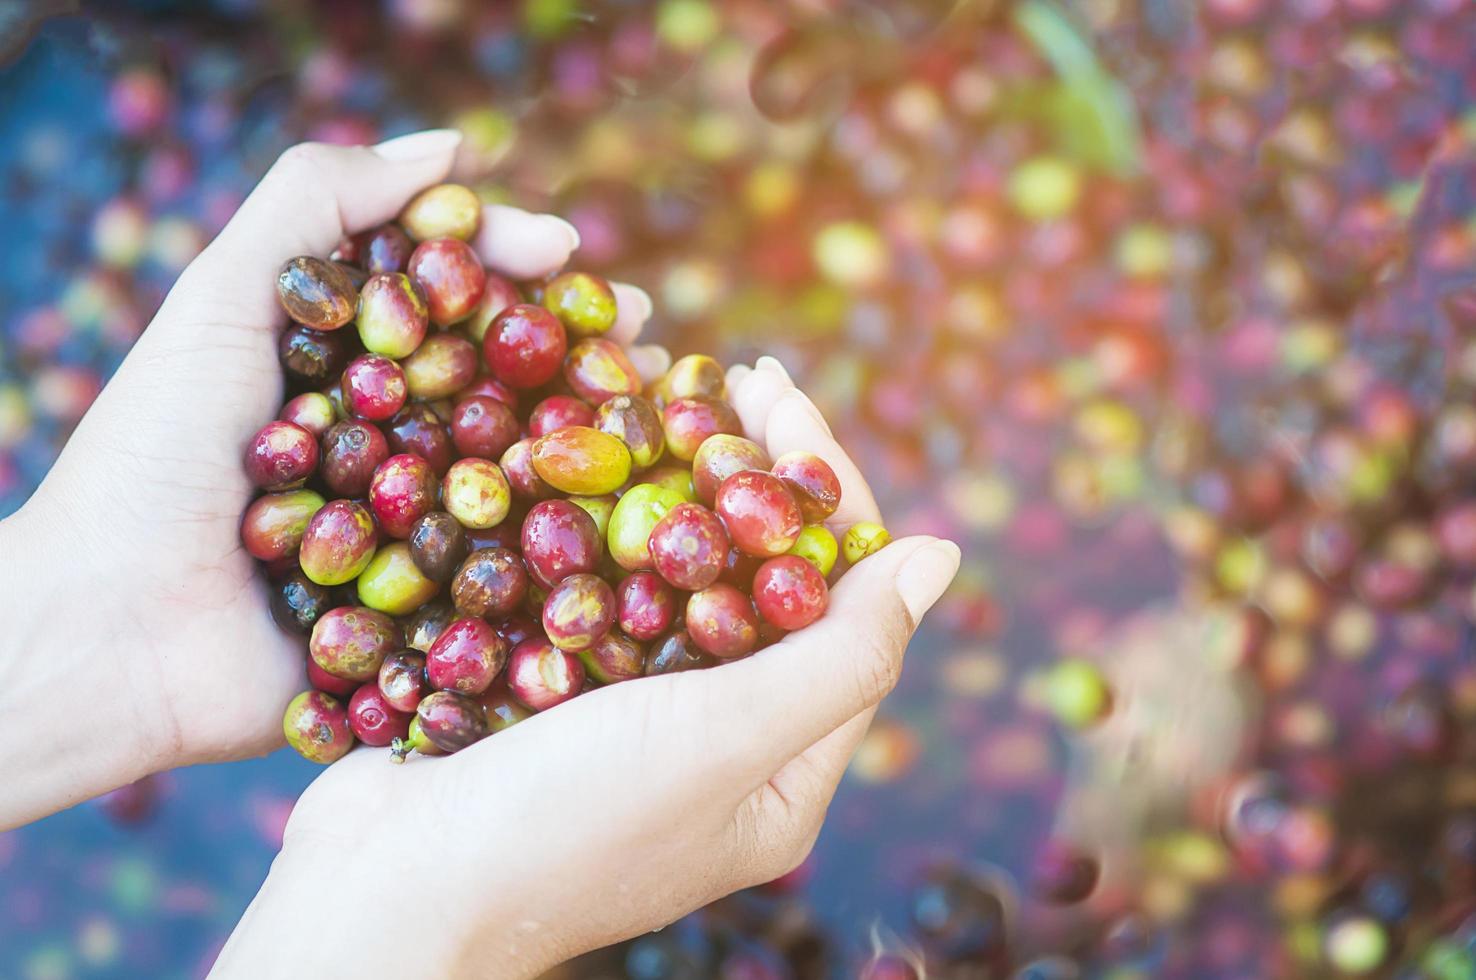 Lady hands holding fresh coffee bean during coffee mill process at local high land area of Chiang Mai north of Thailand - people and small farming agriculture concept photo